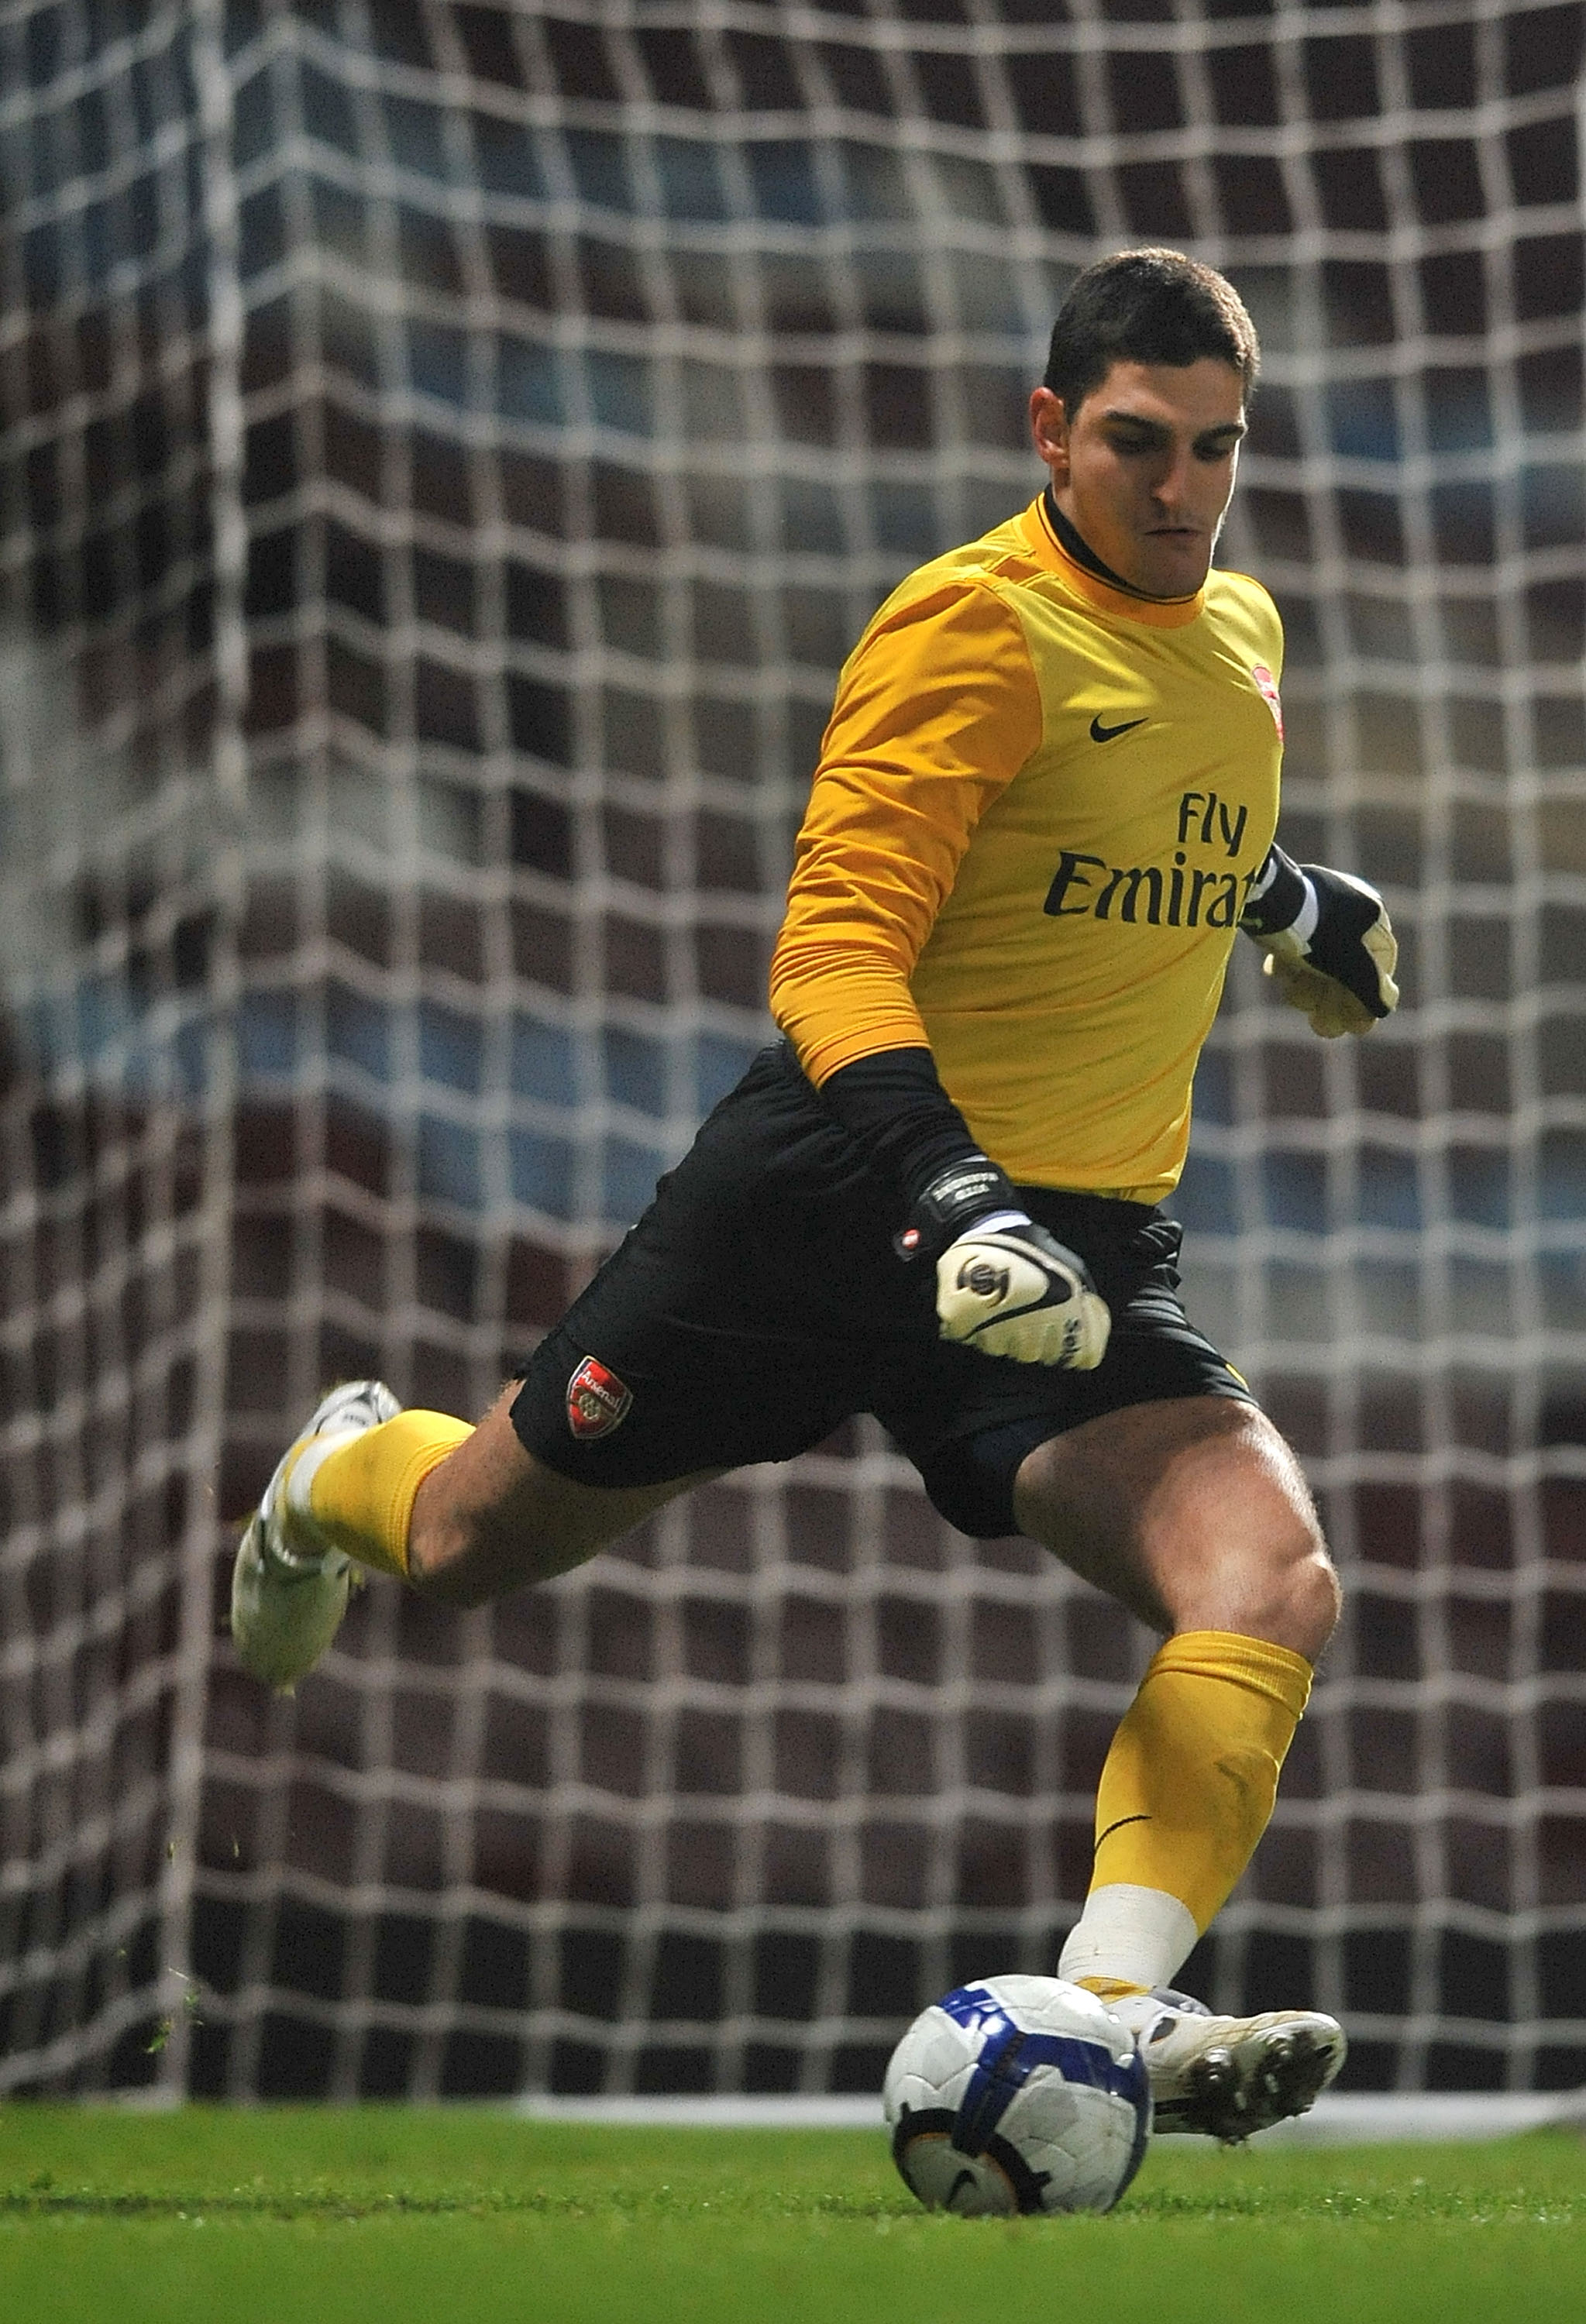 LONDON, ENGLAND - JANUARY 12:  Vito Mannone of Arsenal in action during the reserves match between West Ham United Reserves and Arsenal Reserves at Boleyn Ground on January 12, 2010 in London, England.  (Photo by Christopher Lee/Getty Images)